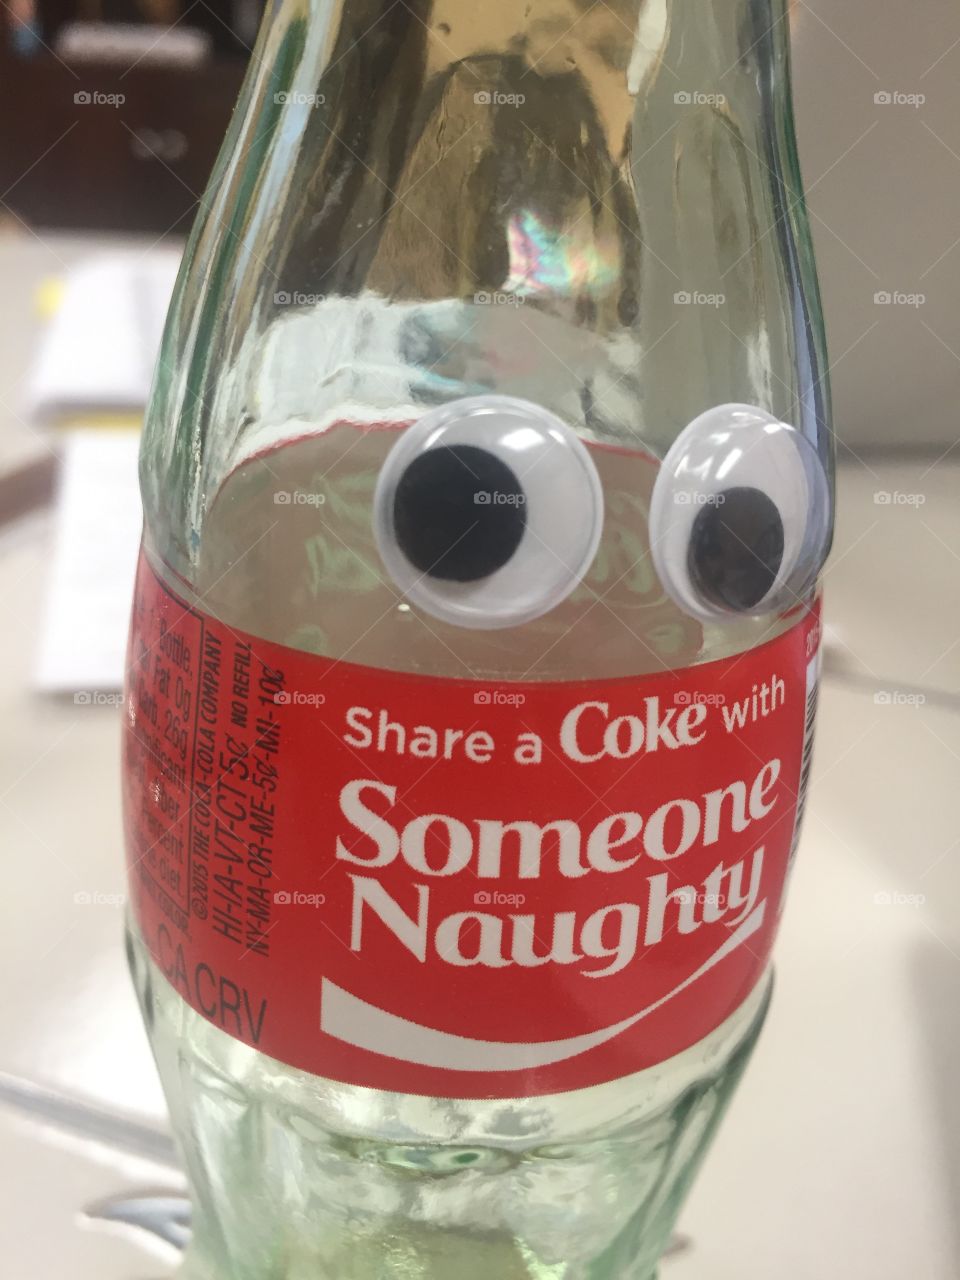 Share a Coke with someone naughty...